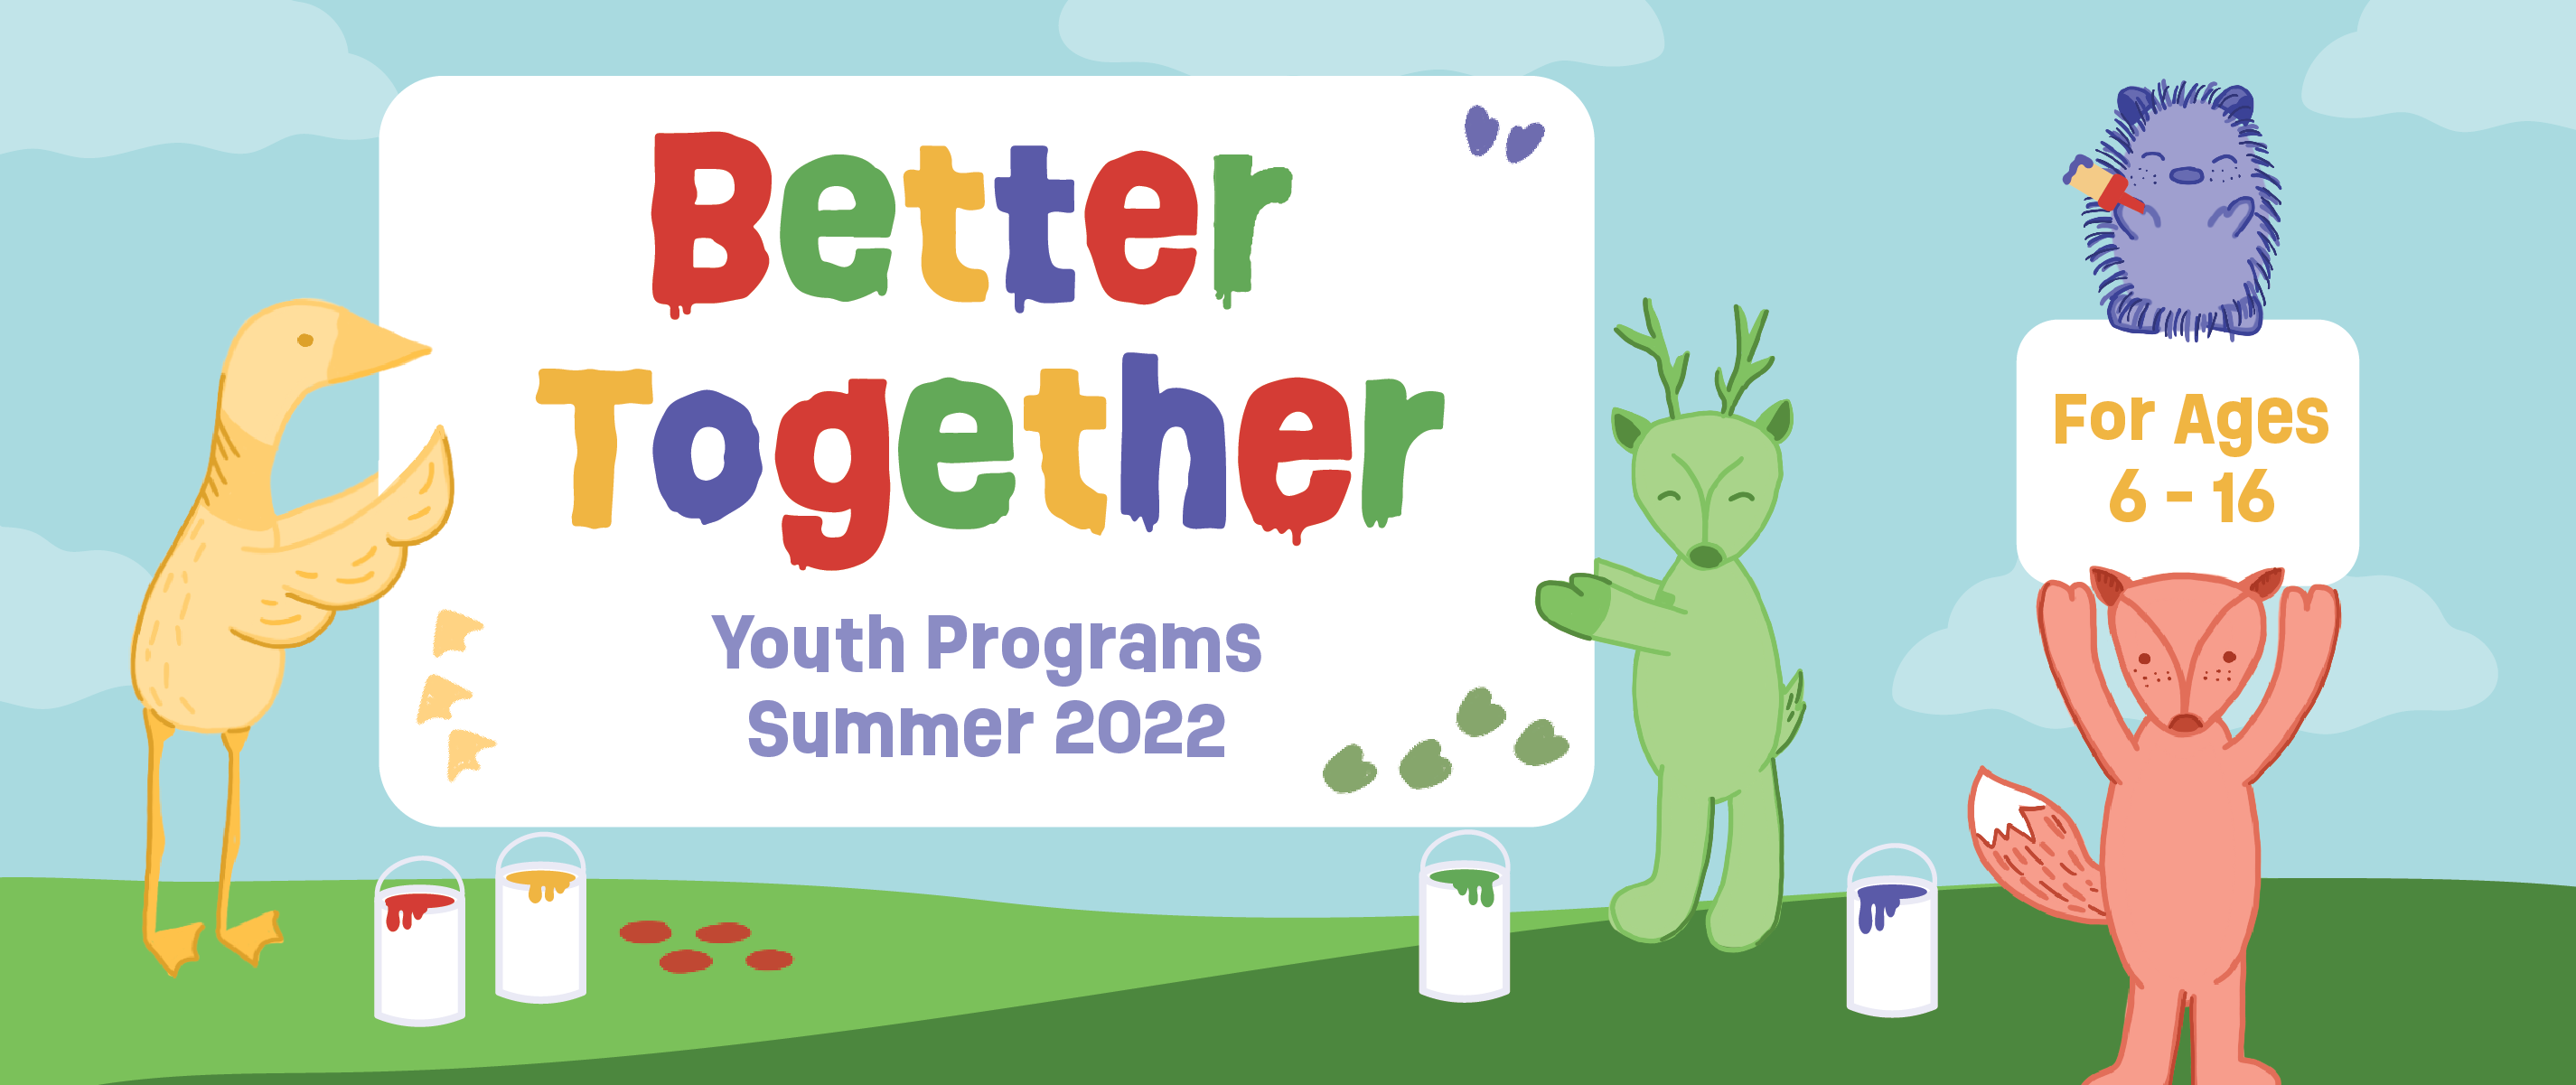 youth programs summer 2022 brand: better together